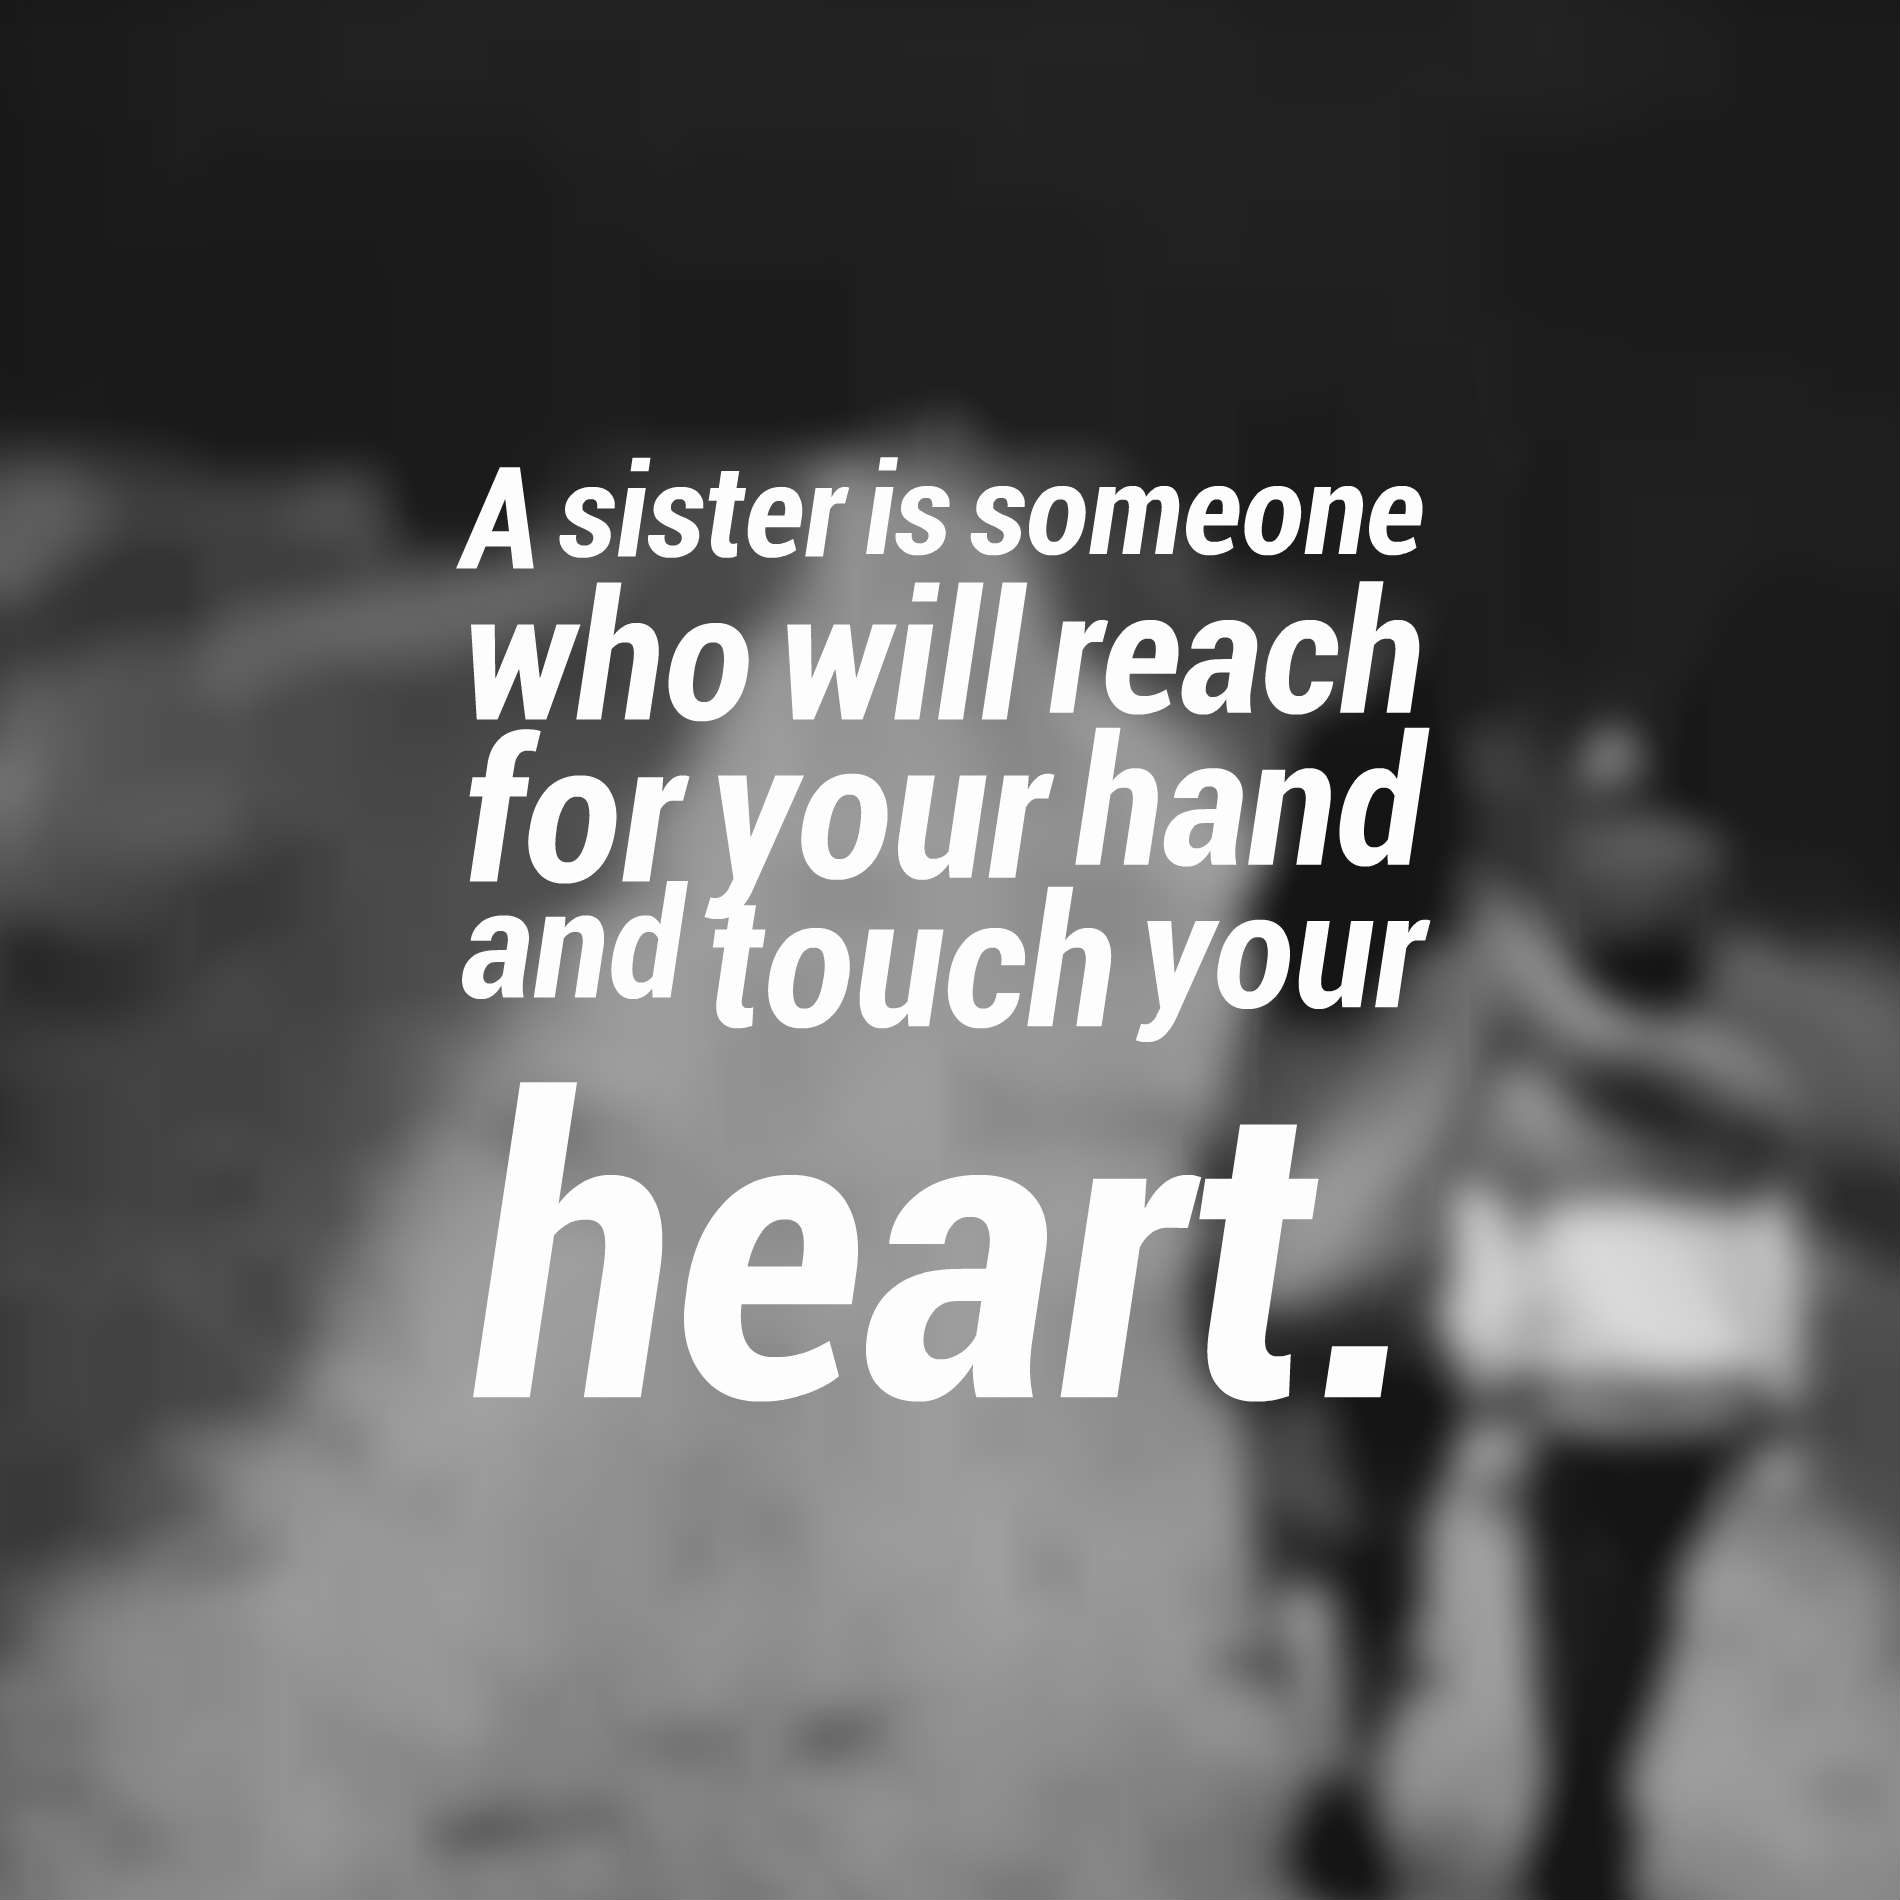 A sister is someone who will reach for your hand and touch your heart.